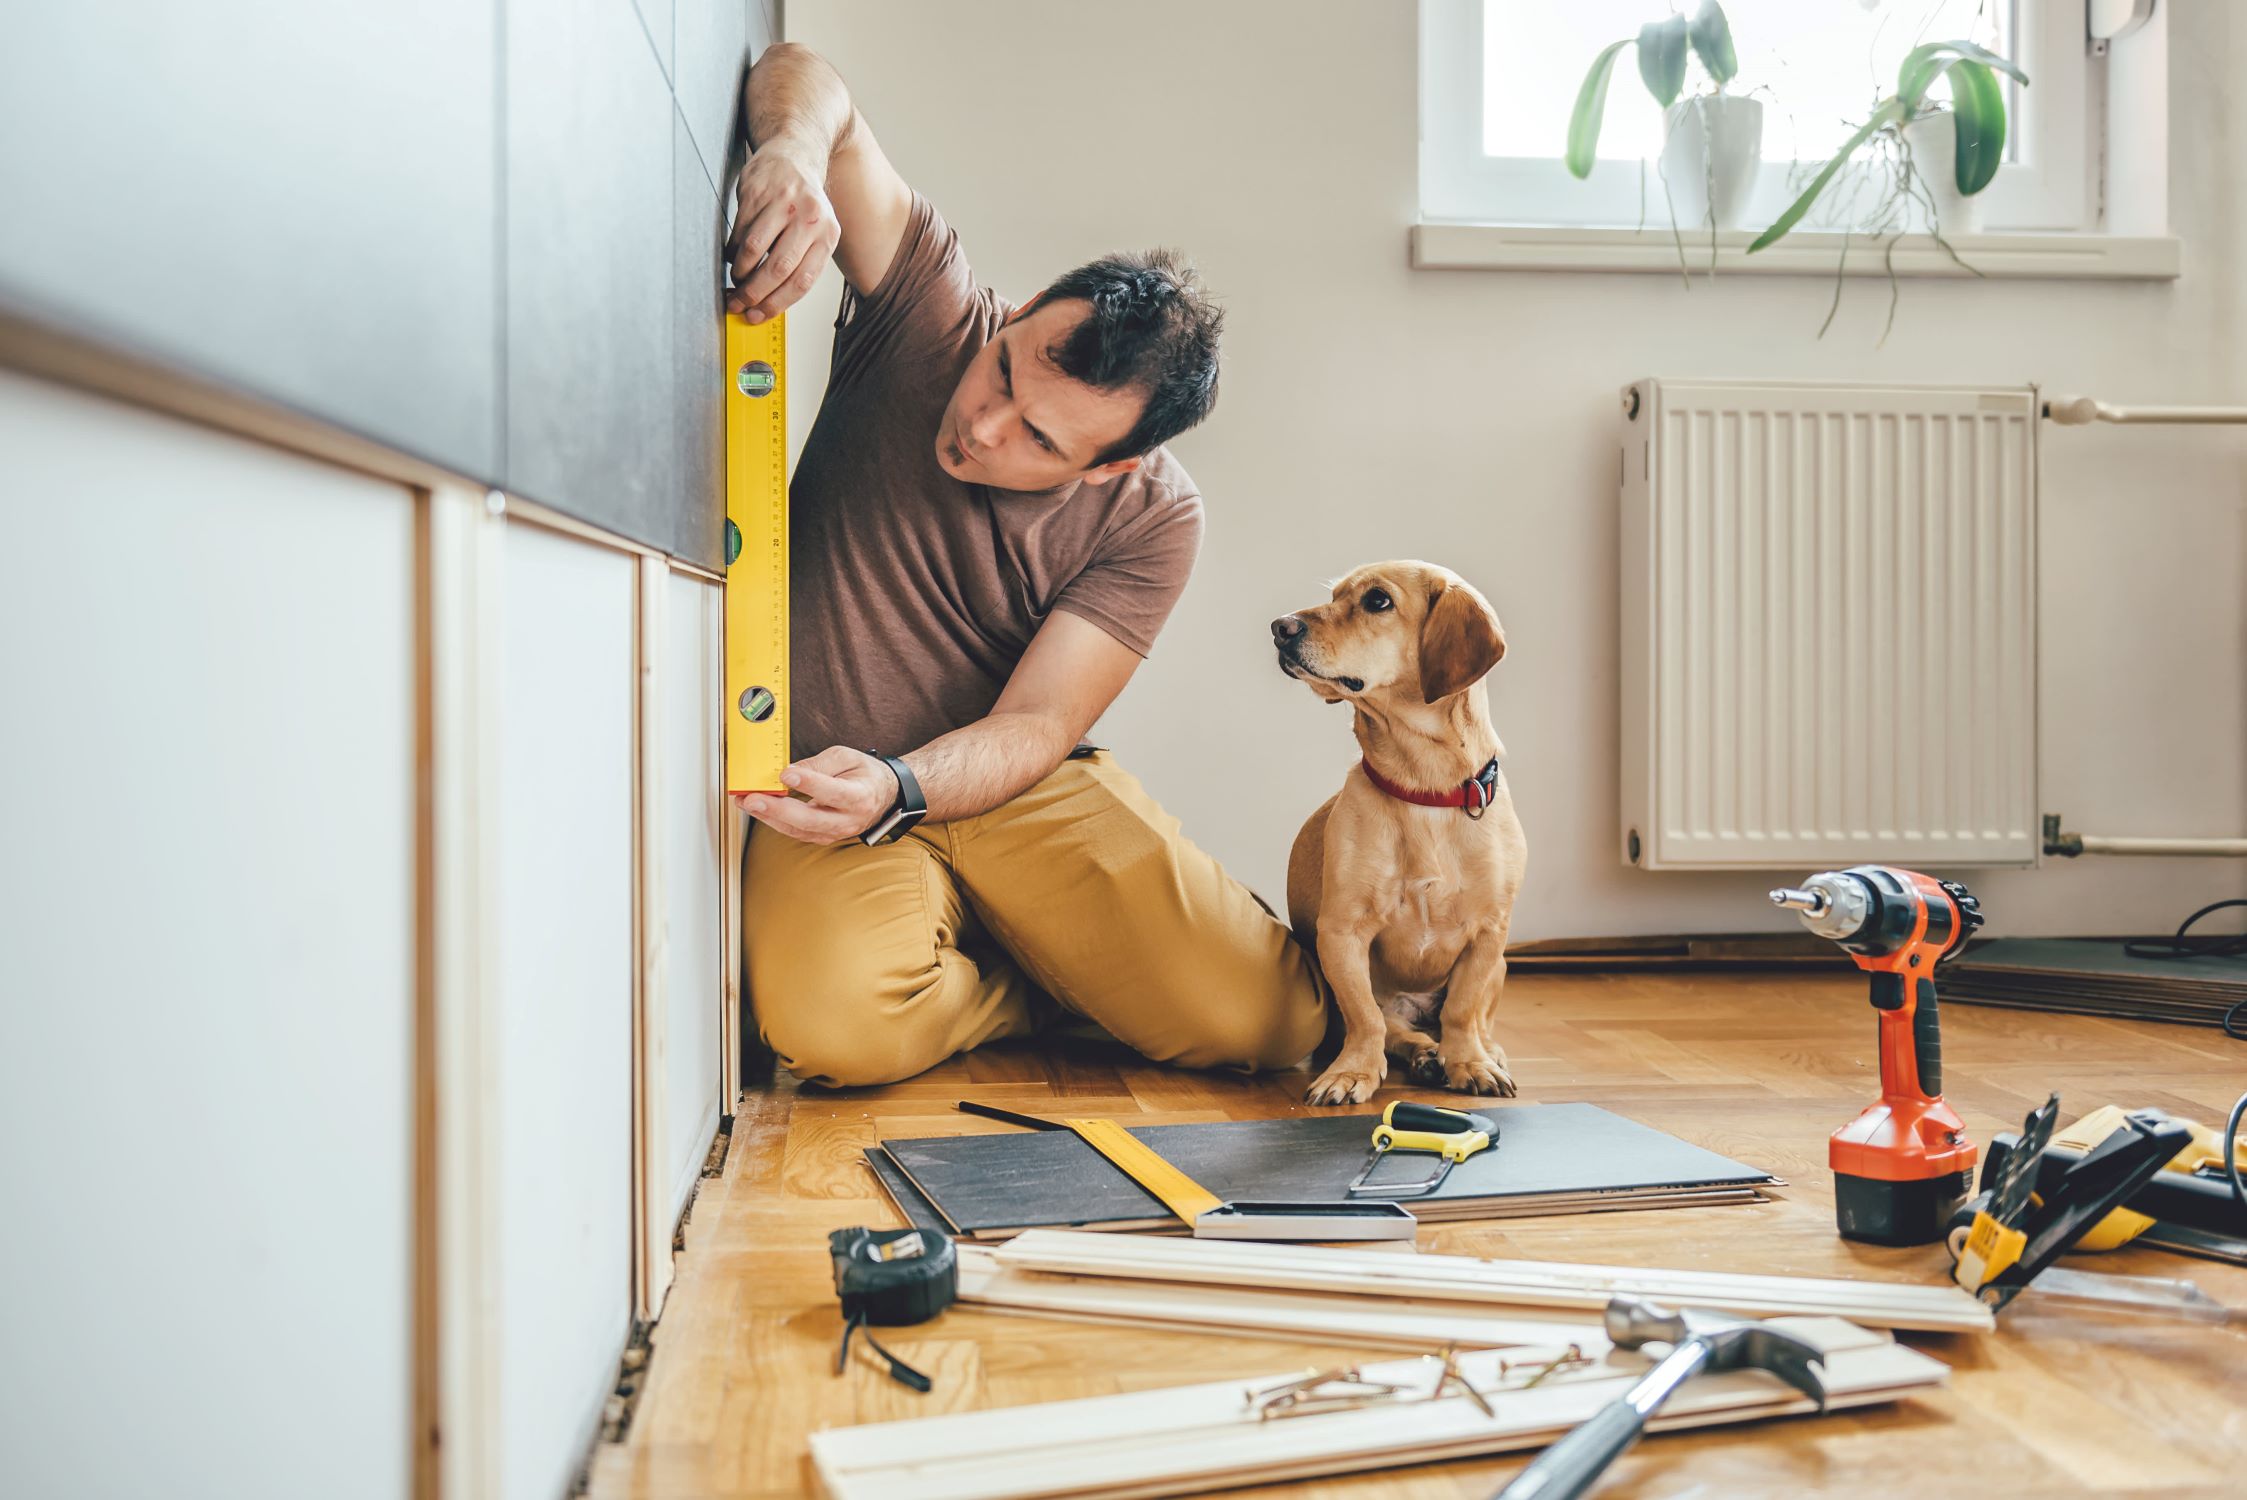 What Are The Biggest Trends In Home Maintenance Or Repair